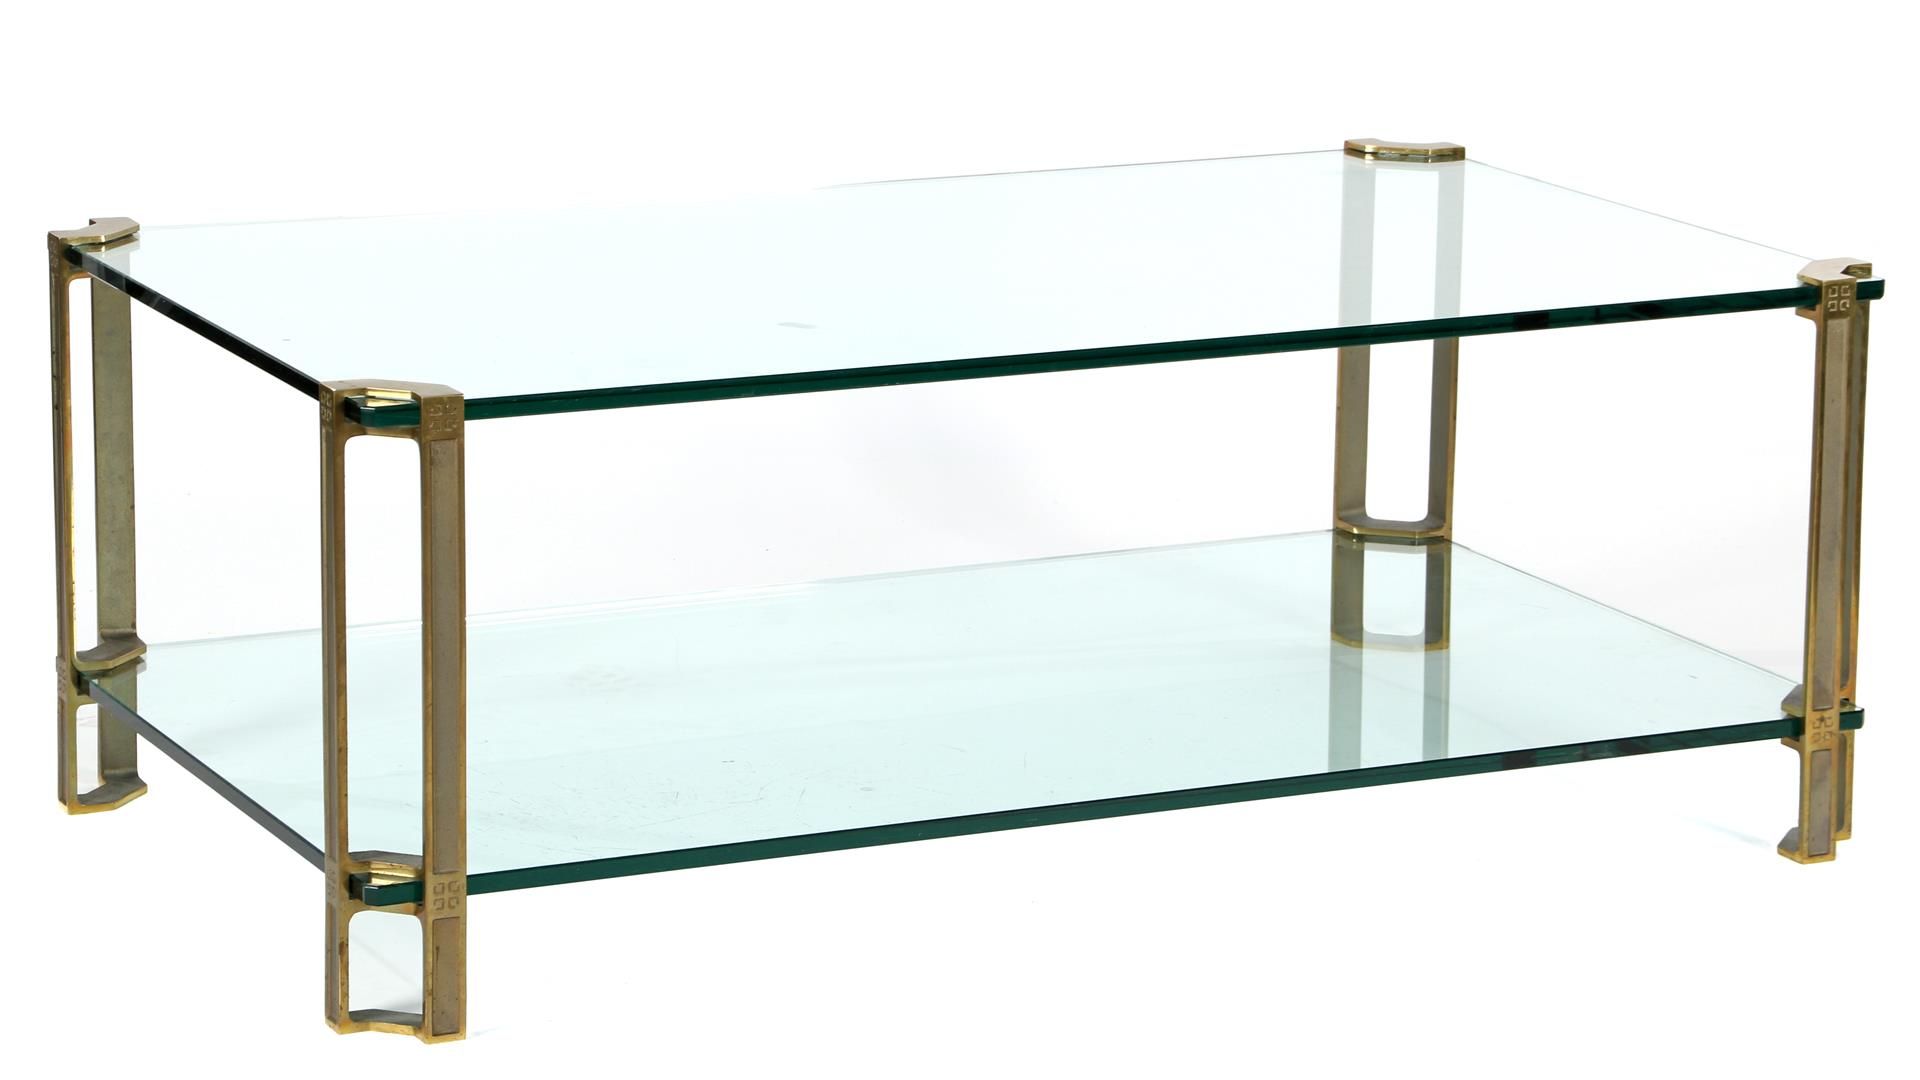 PETER GHYCZY Peter Ghyczy (1940-)

Coffee table with 2 glass plates clamped by b&hellip;